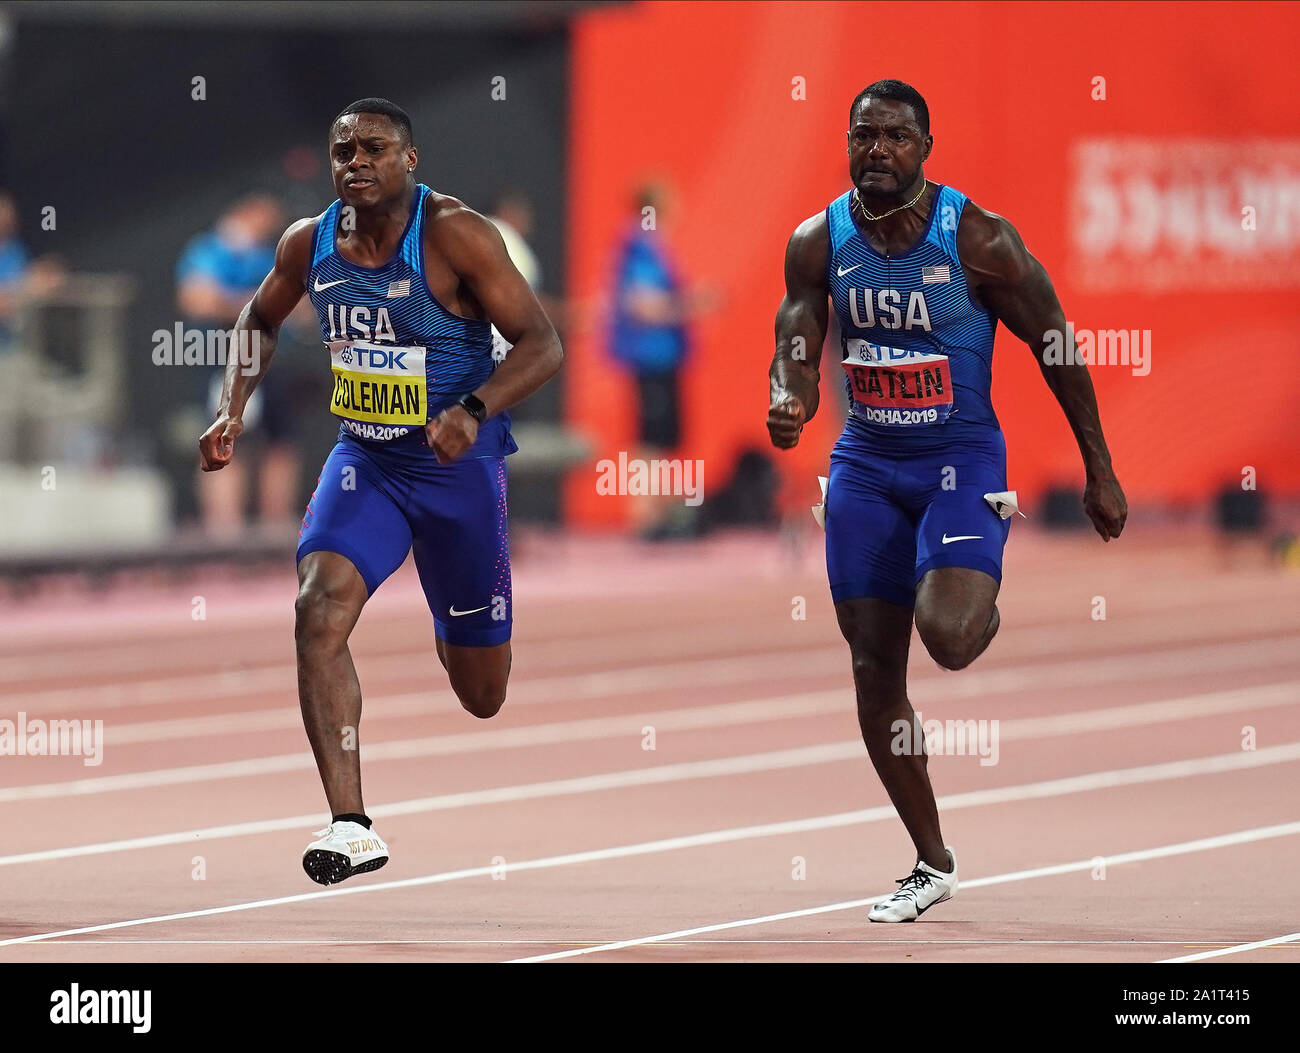 Doha, Qatar. 28th Sep, 2019. Christian Coleman of United States and Justin Gatlin of United States competing in the 100 meter for men during the 17th IAAF World Athletics Championships at the Khalifa Stadium in Doha, Qatar. Ulrik Pedersen/CSM/Alamy Live News Stock Photo